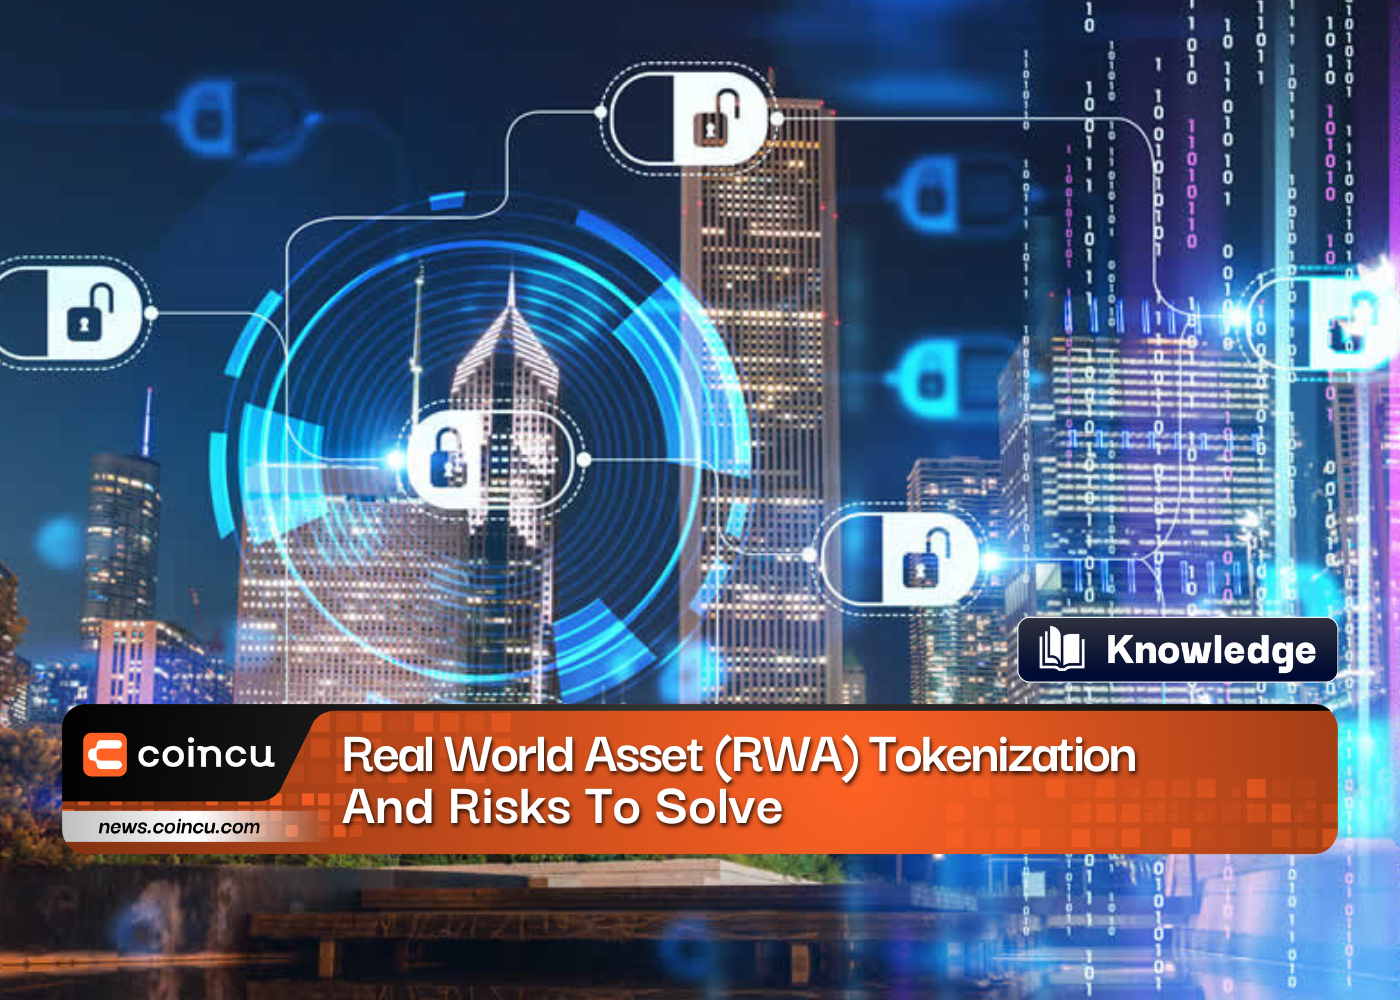 Real World Asset (RWA) Tokenization And Risks To Solve